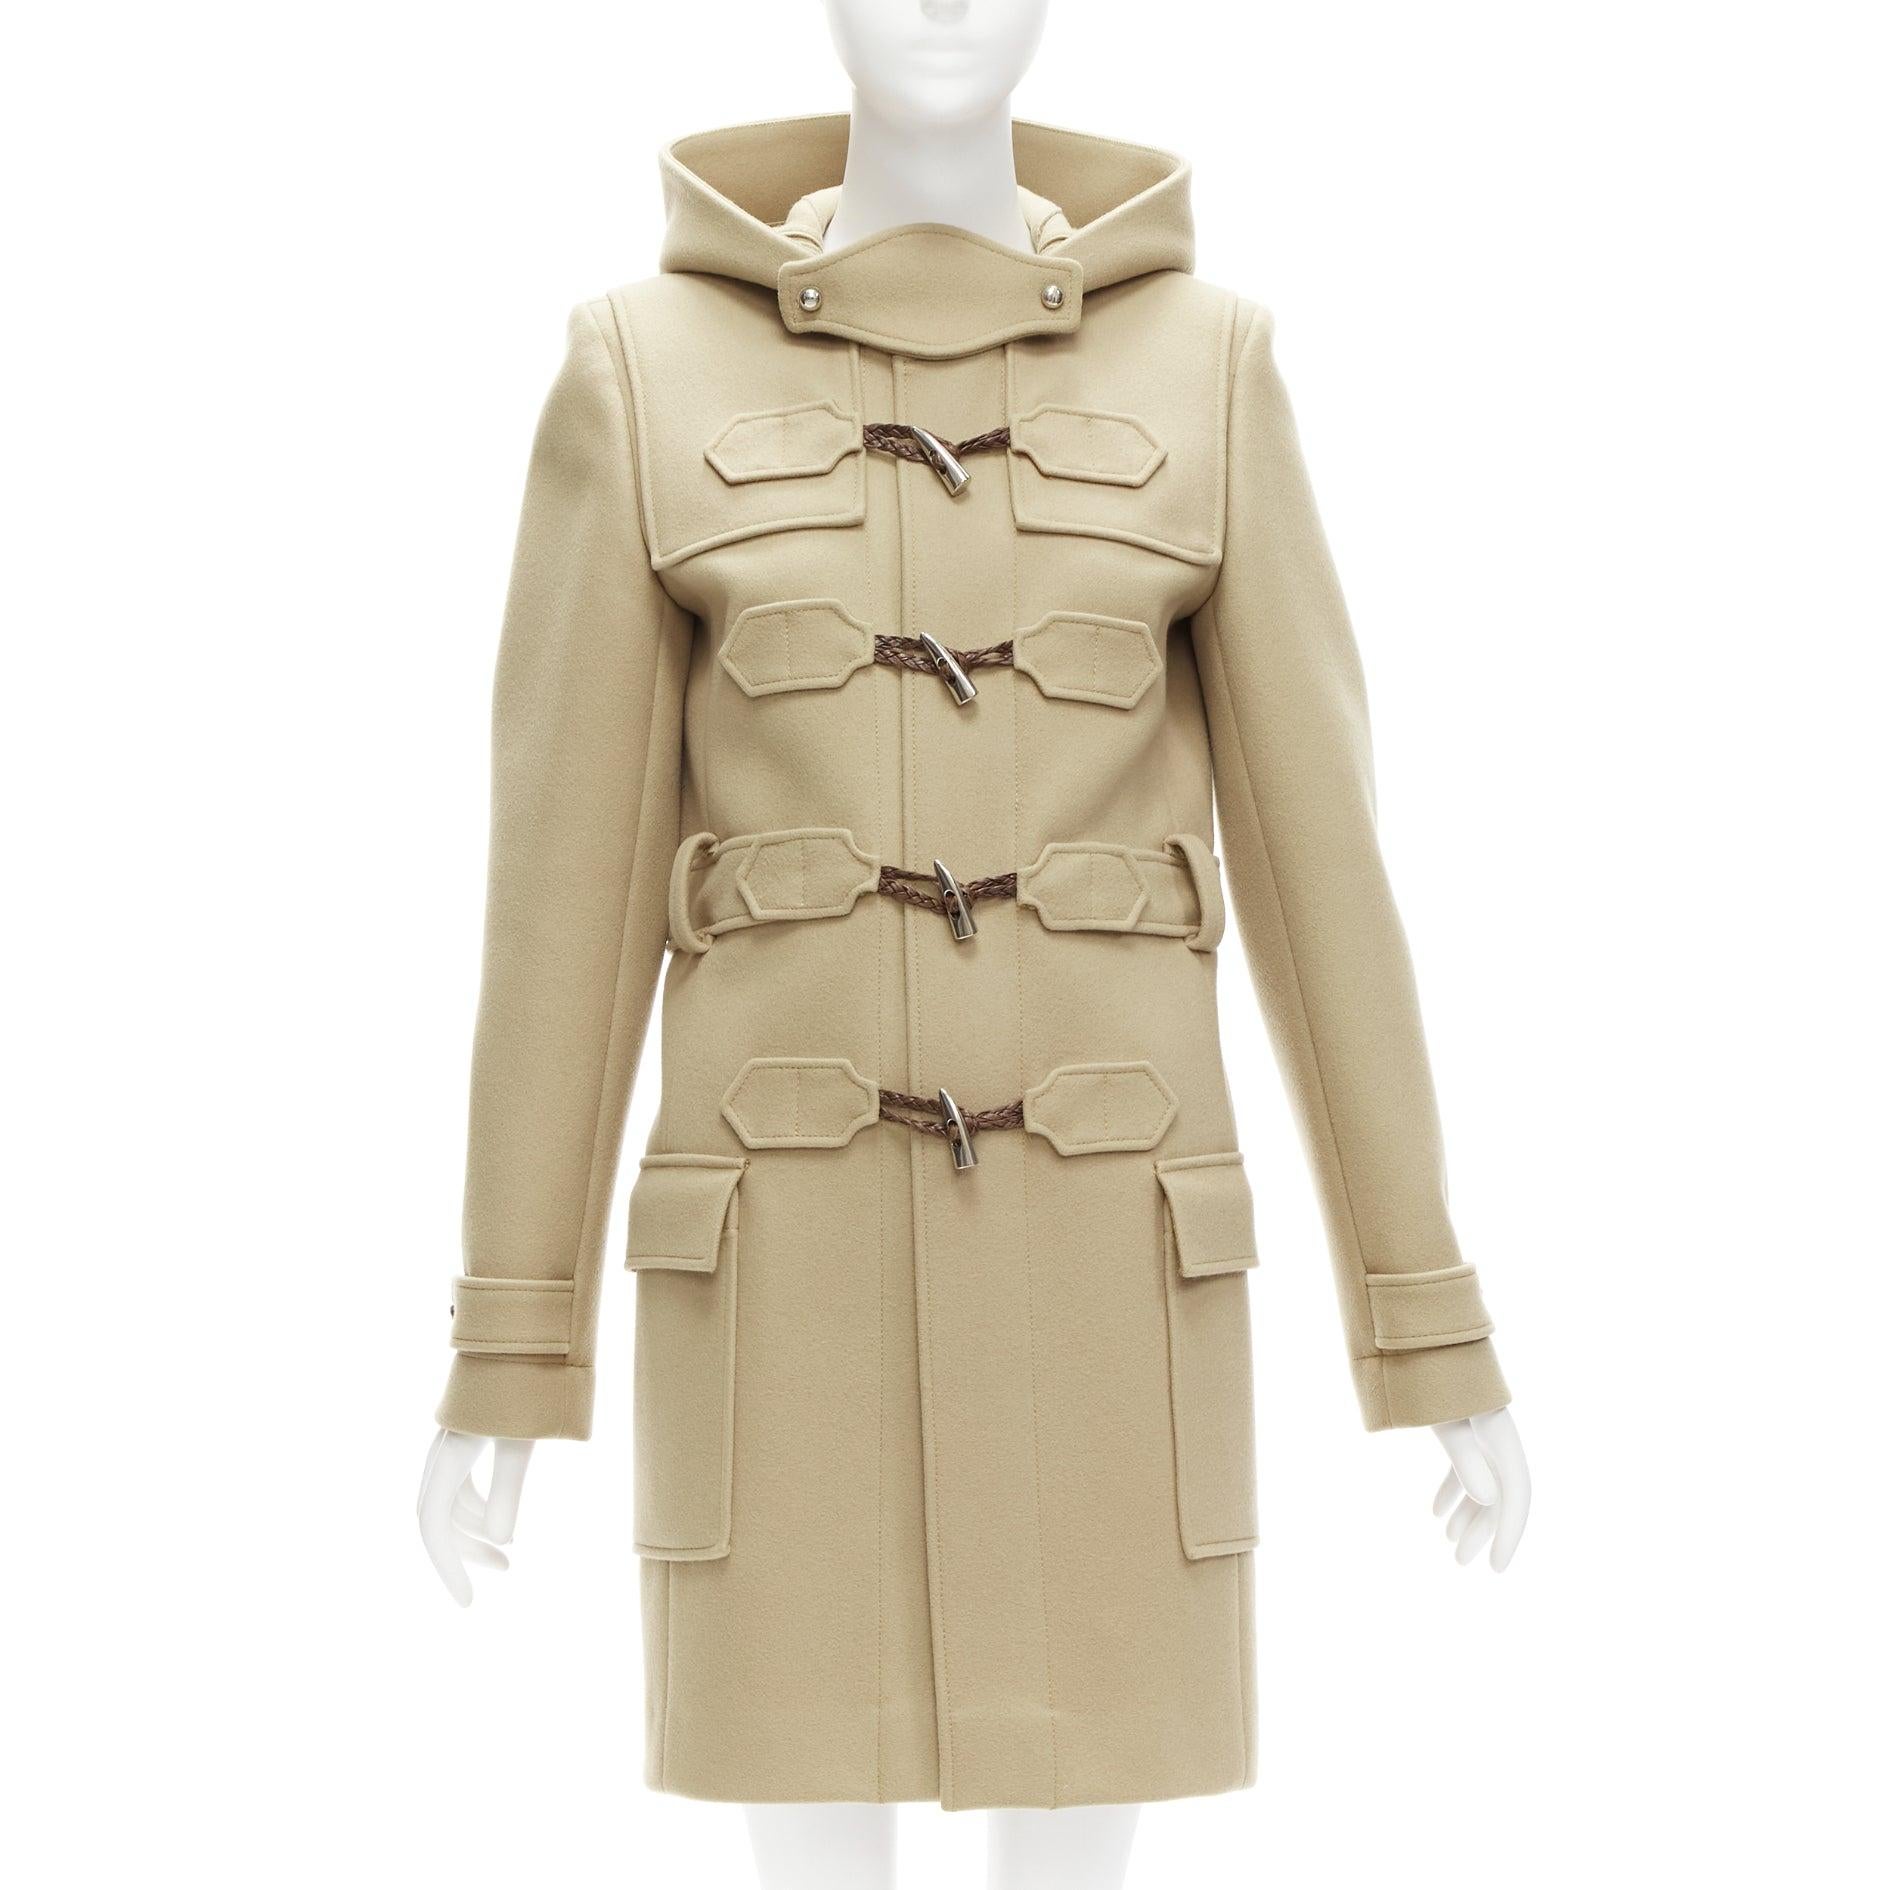 BALENCIAGA 2005 Ghesquiere beige wool blend toggle hooded coat FR38 M
Reference: TGAS/D00910
Brand: Balenciaga
Designer: Nicolas Ghesquiere
Collection: 2005
Material: Wool, Virgin Wool, Nylon
Color: Beige, Silver
Pattern: Solid
Closure: Button
Extra